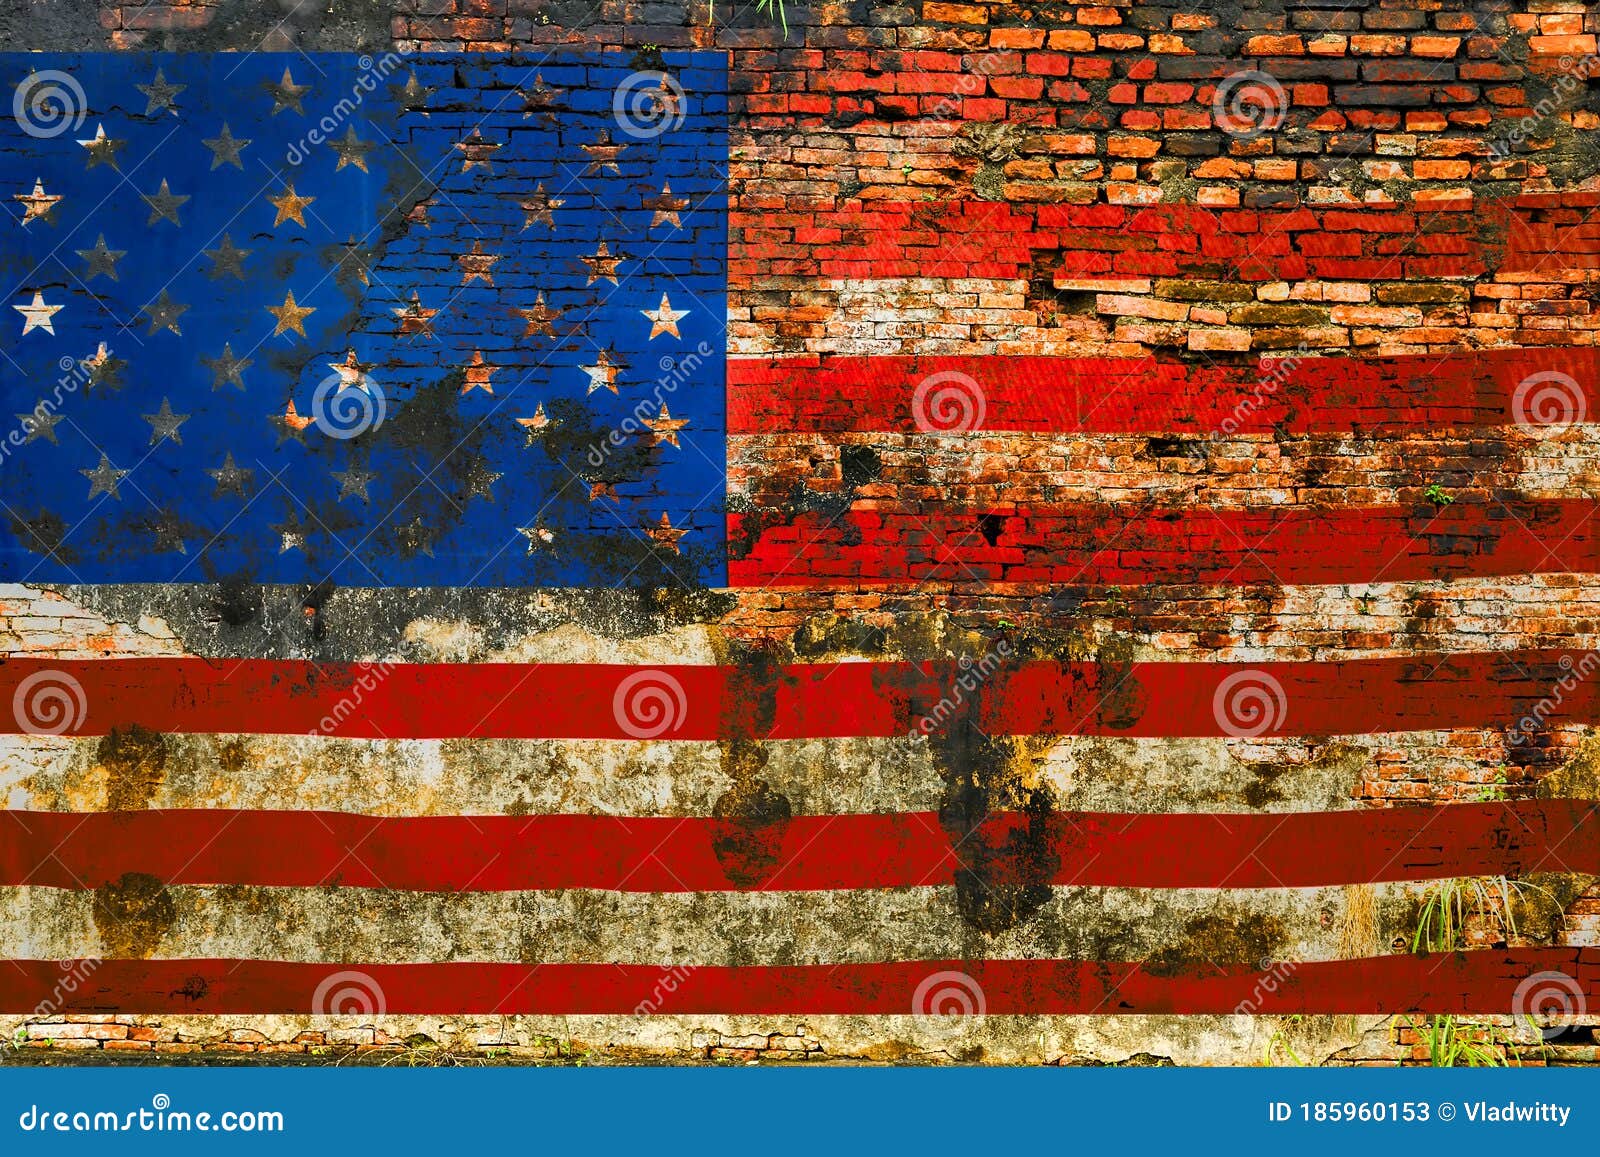 Brick Wall Background United States Of America Flag Of The Usa Stock